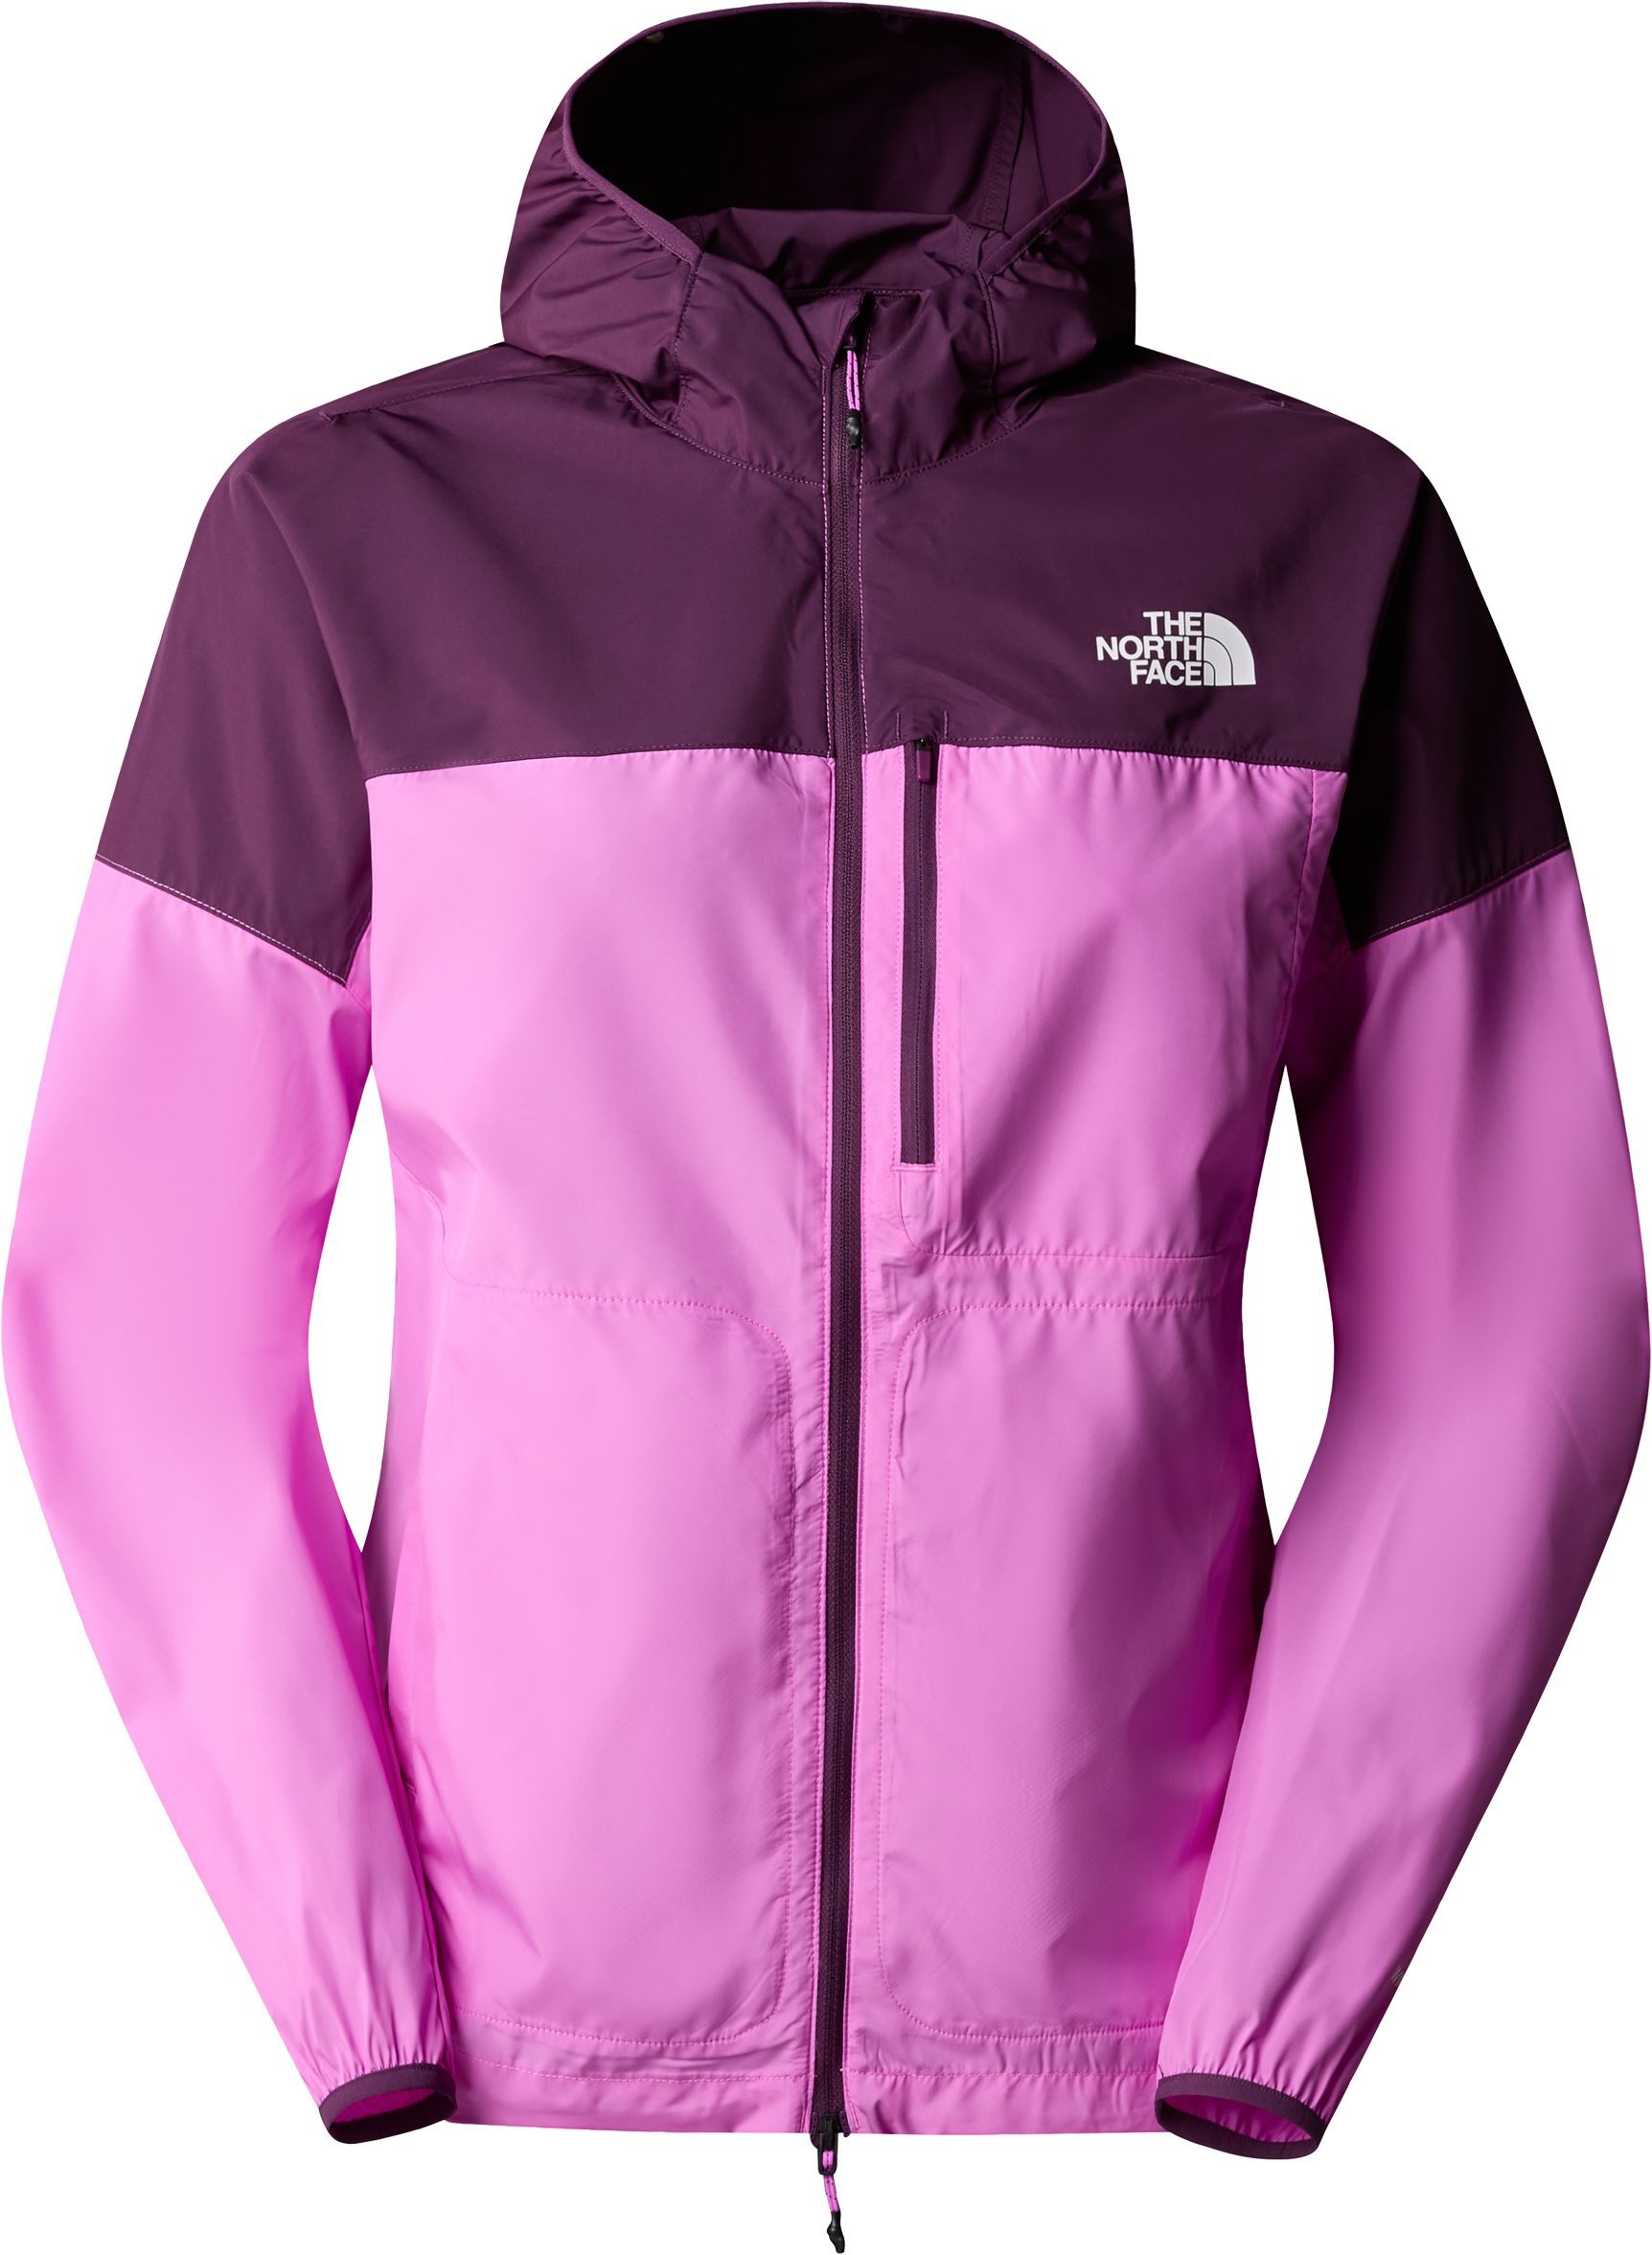 THE NORTH FACE, W HIGHER RUN WIND JACKET